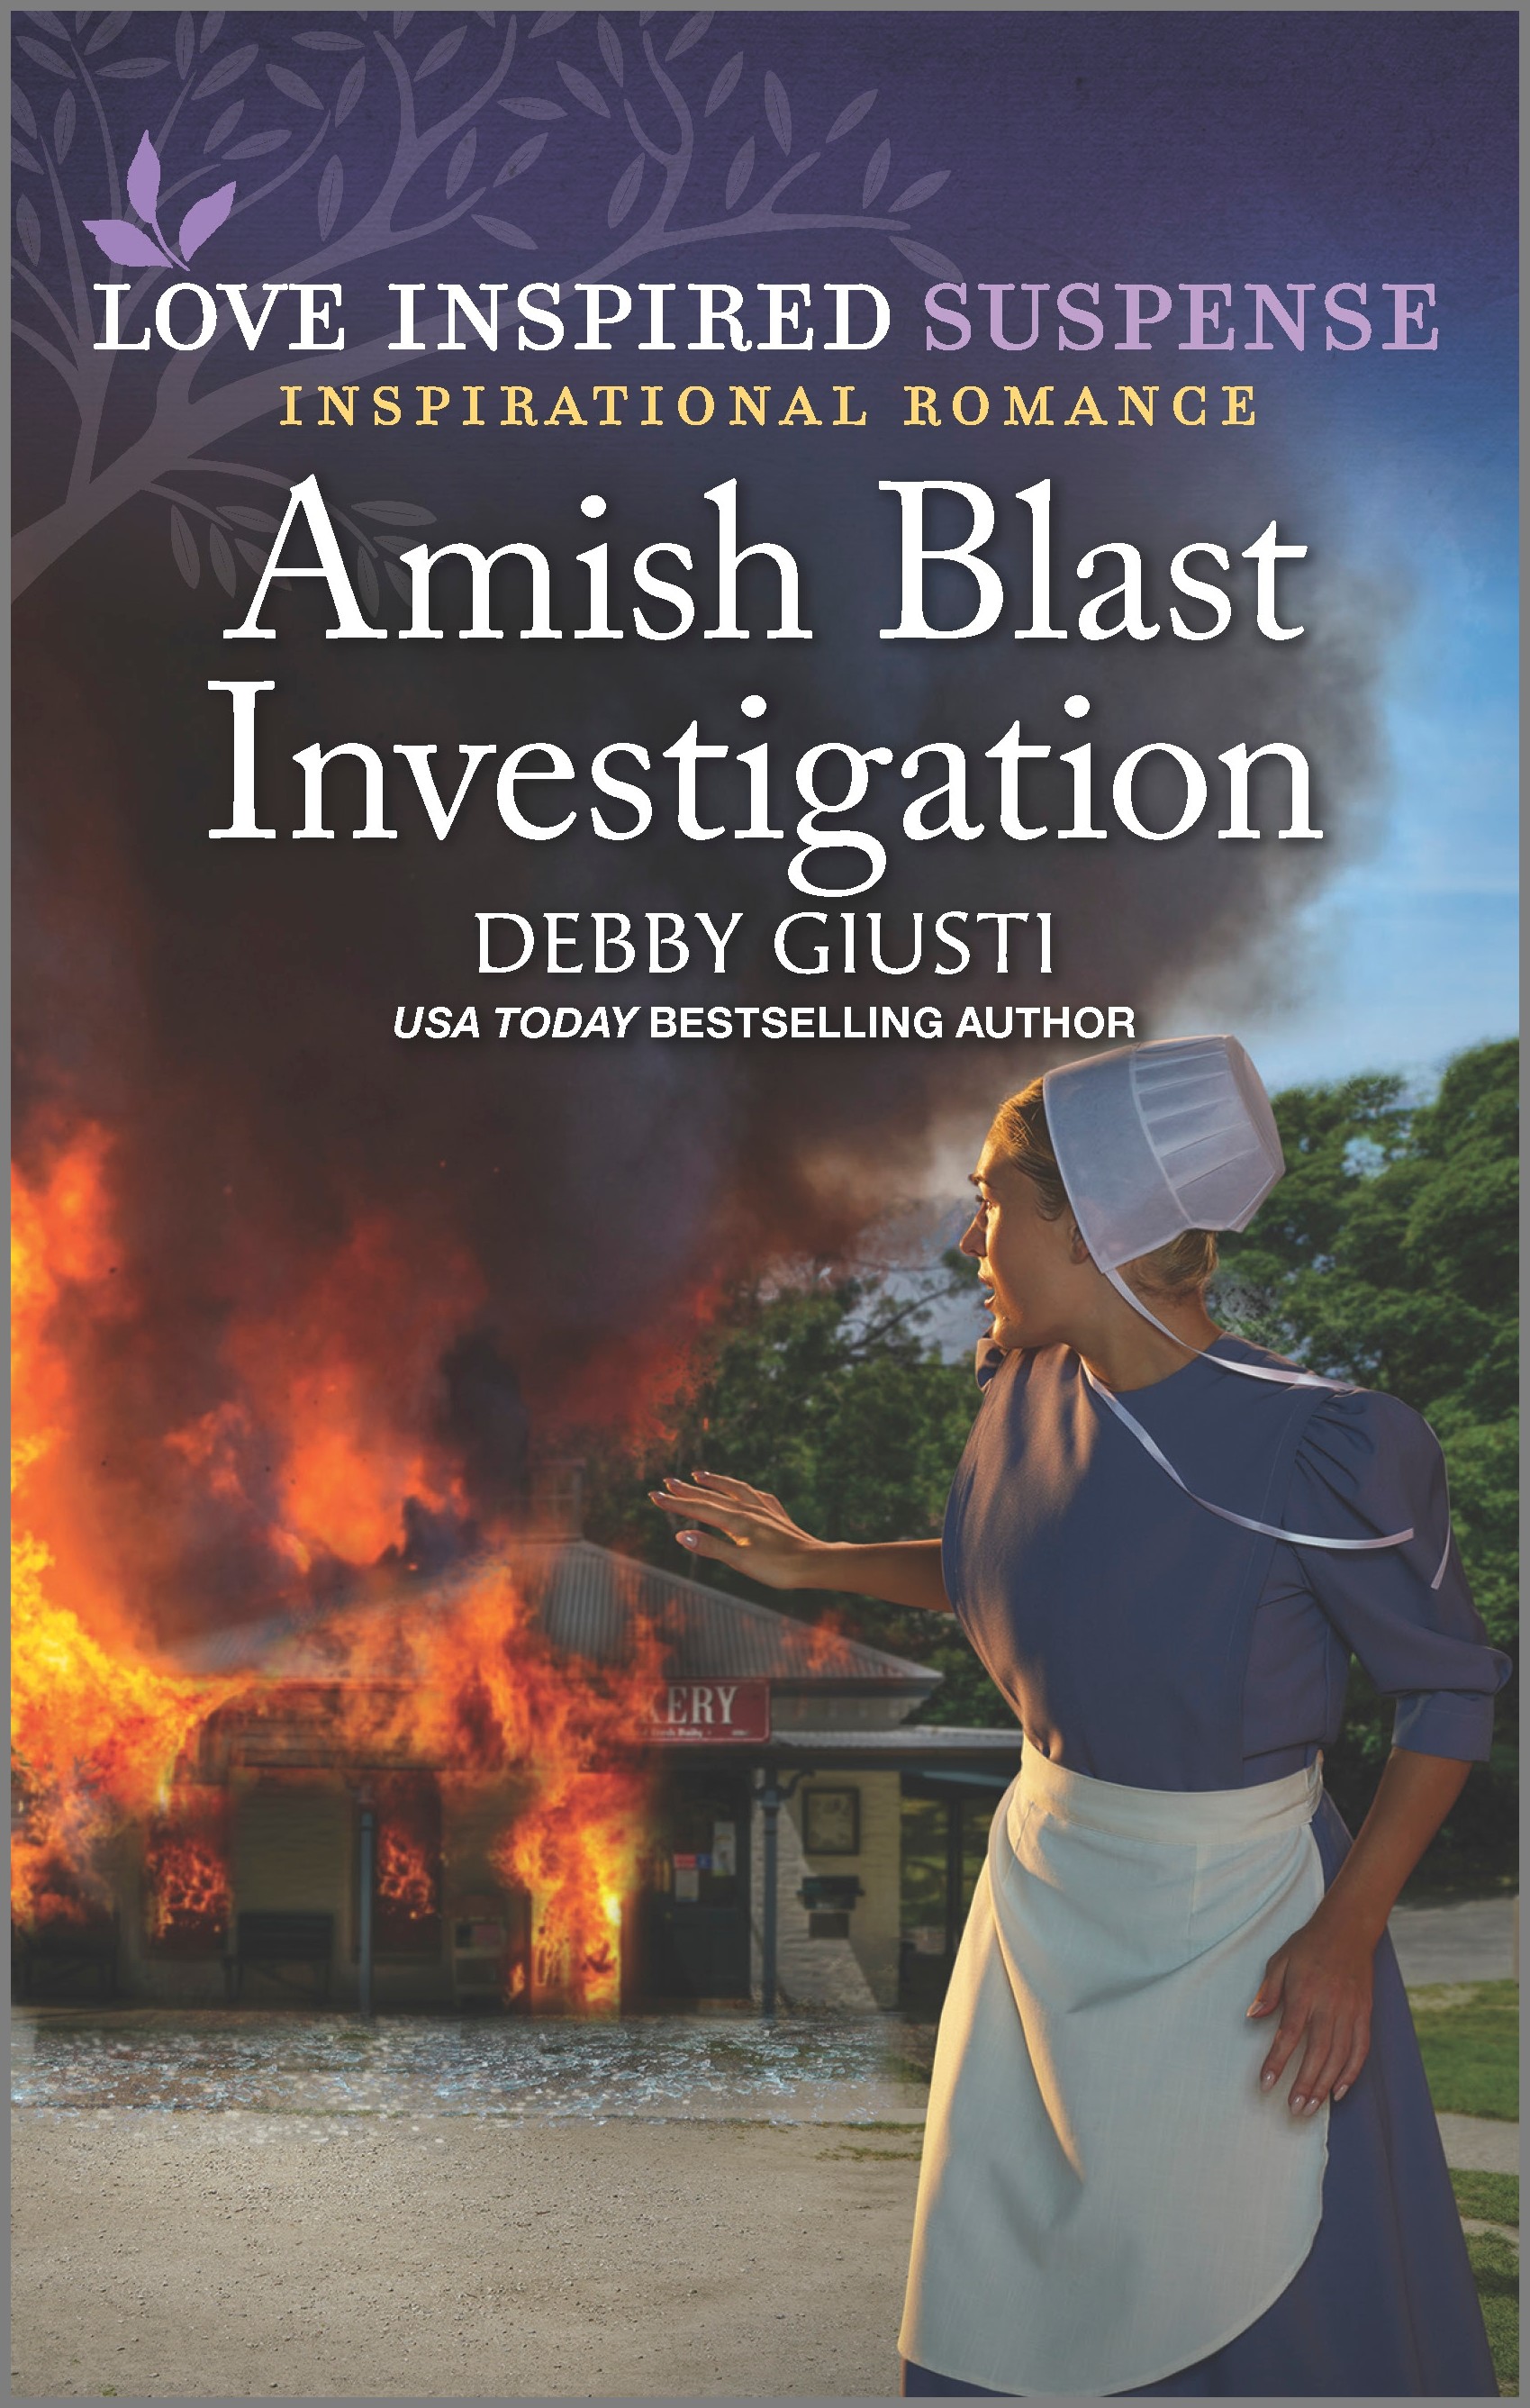 Cover image for AMISH BLAST INVESTIGATION by Debby Giusti, featuring an amish woman looking over her shoulder in shock at a cabin that is on fire.